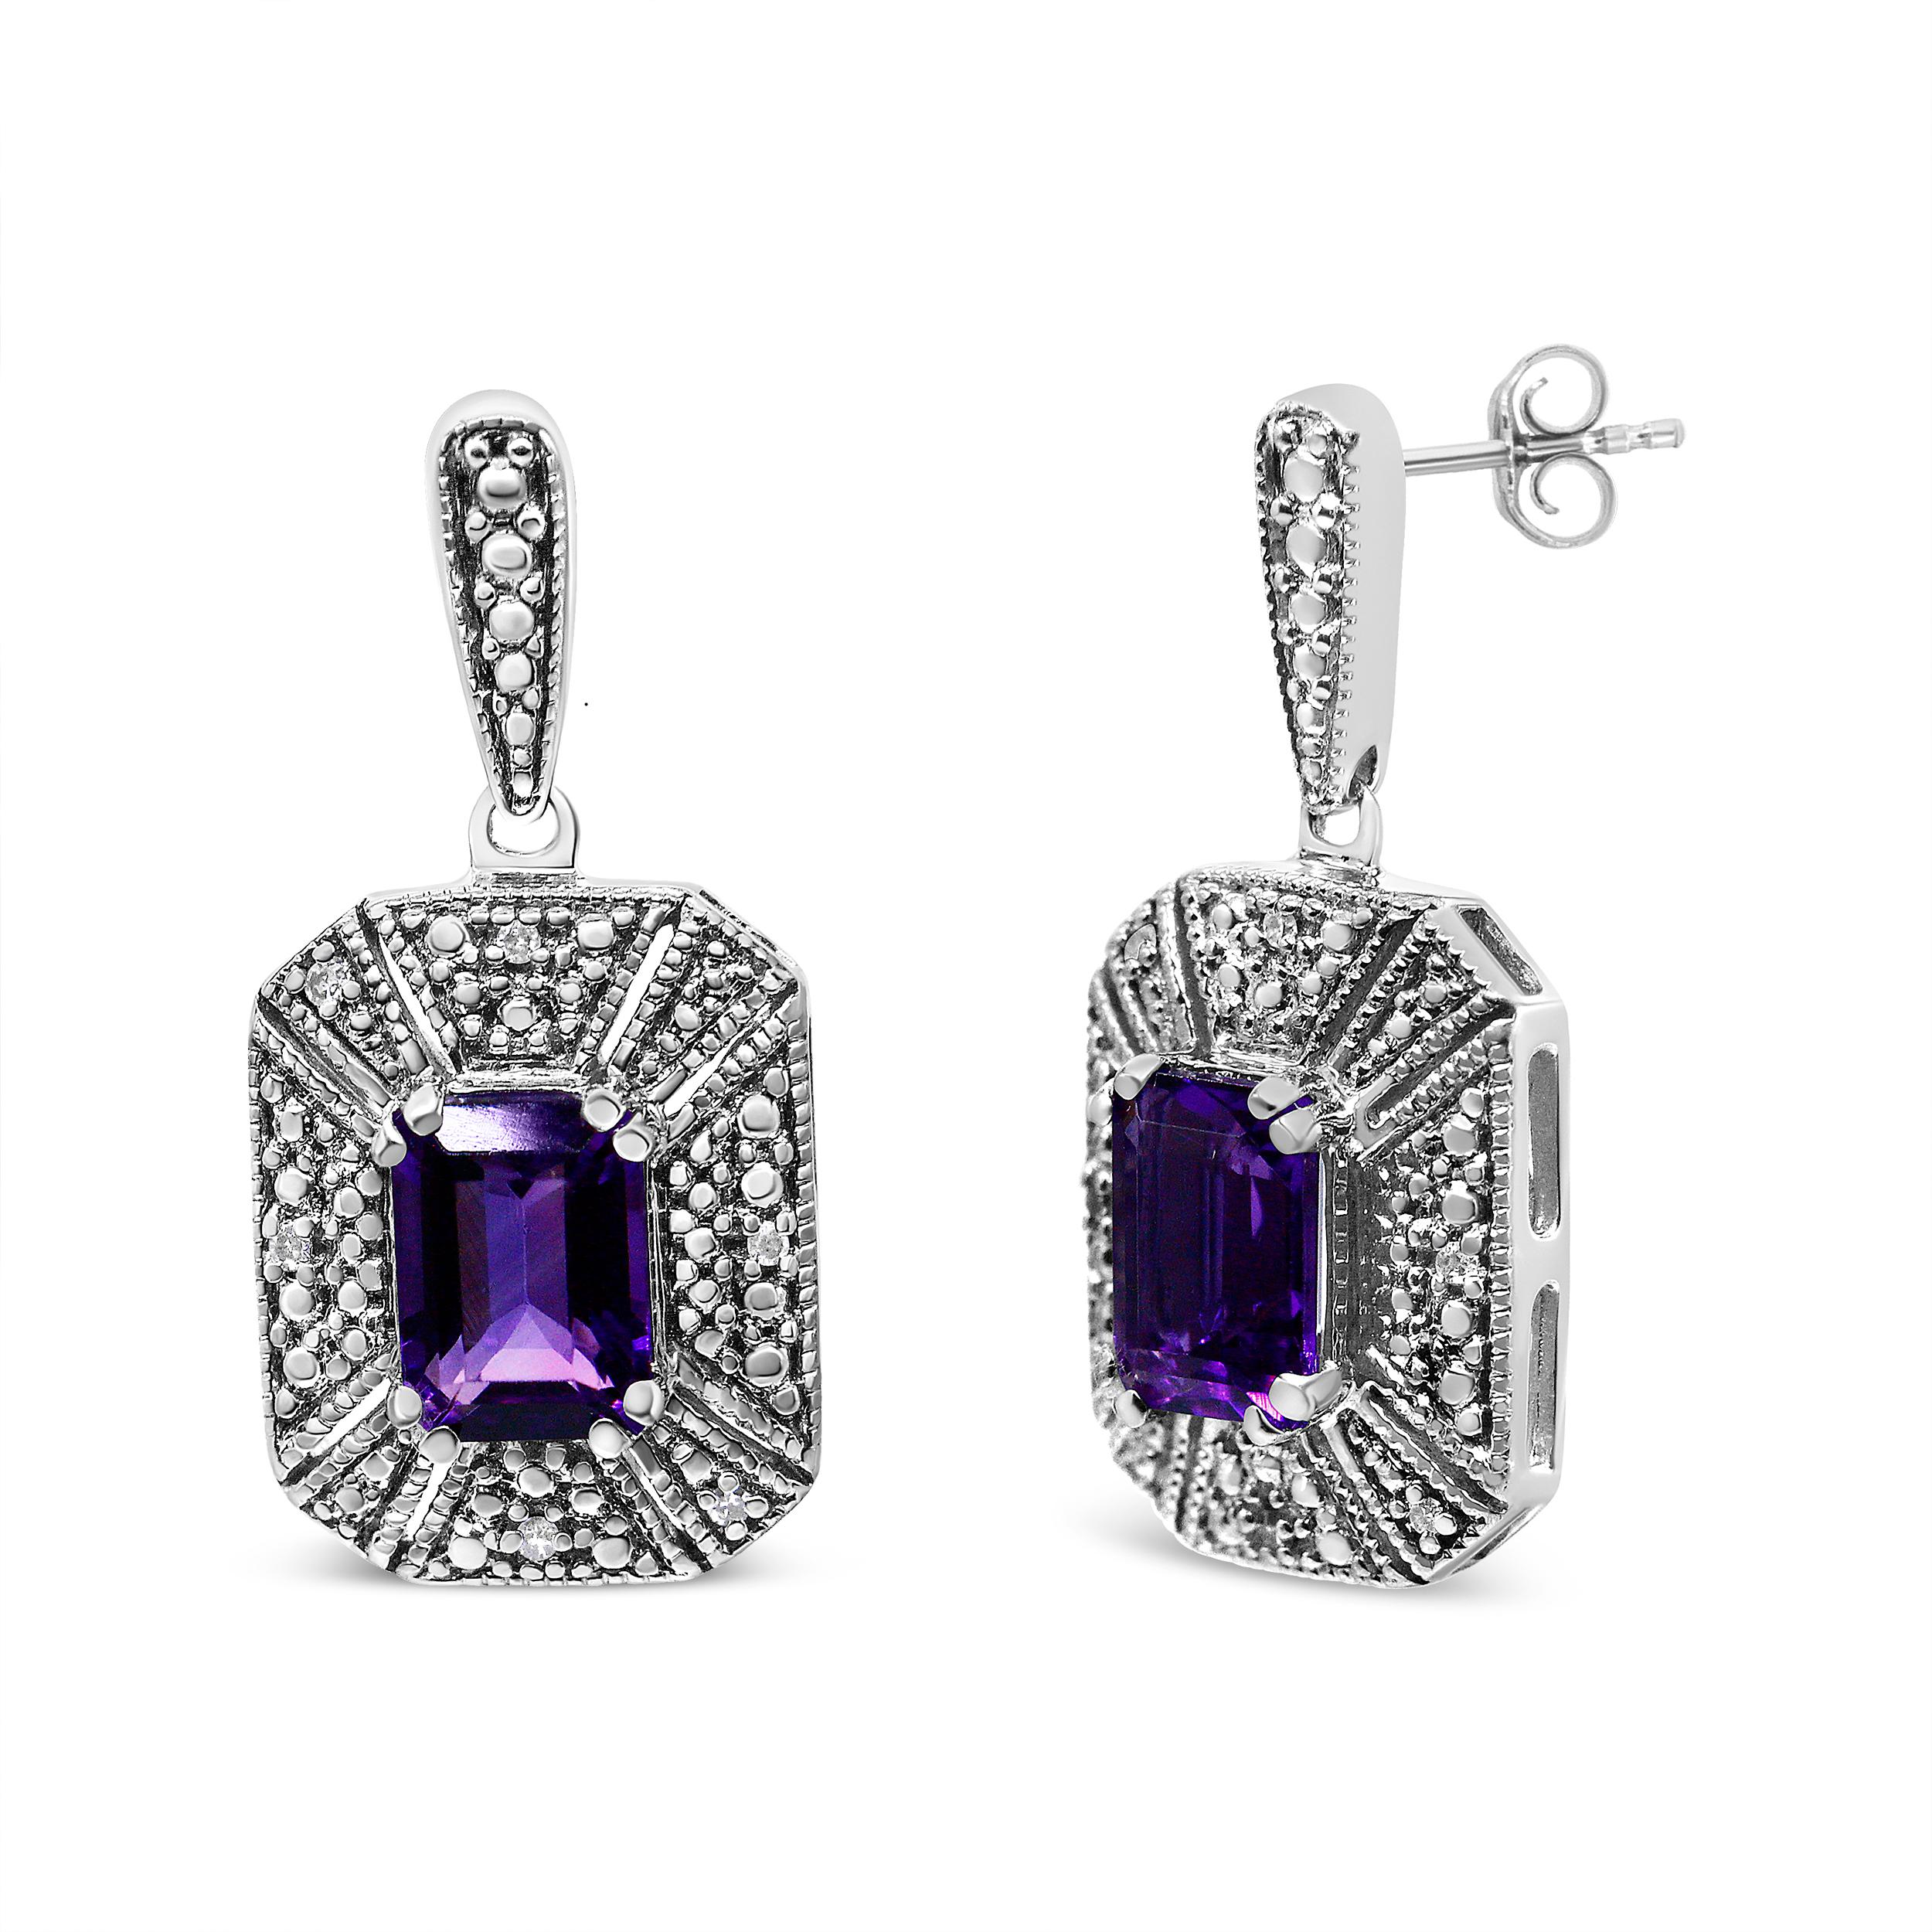 Let the rich color and sparkling grandeur of gemstones and diamonds accentuate your style when you wear these sensational .925 sterling silver halo stud earrings! At the center of each earring is a 7x5mm rectangular amethyst gemstone in a